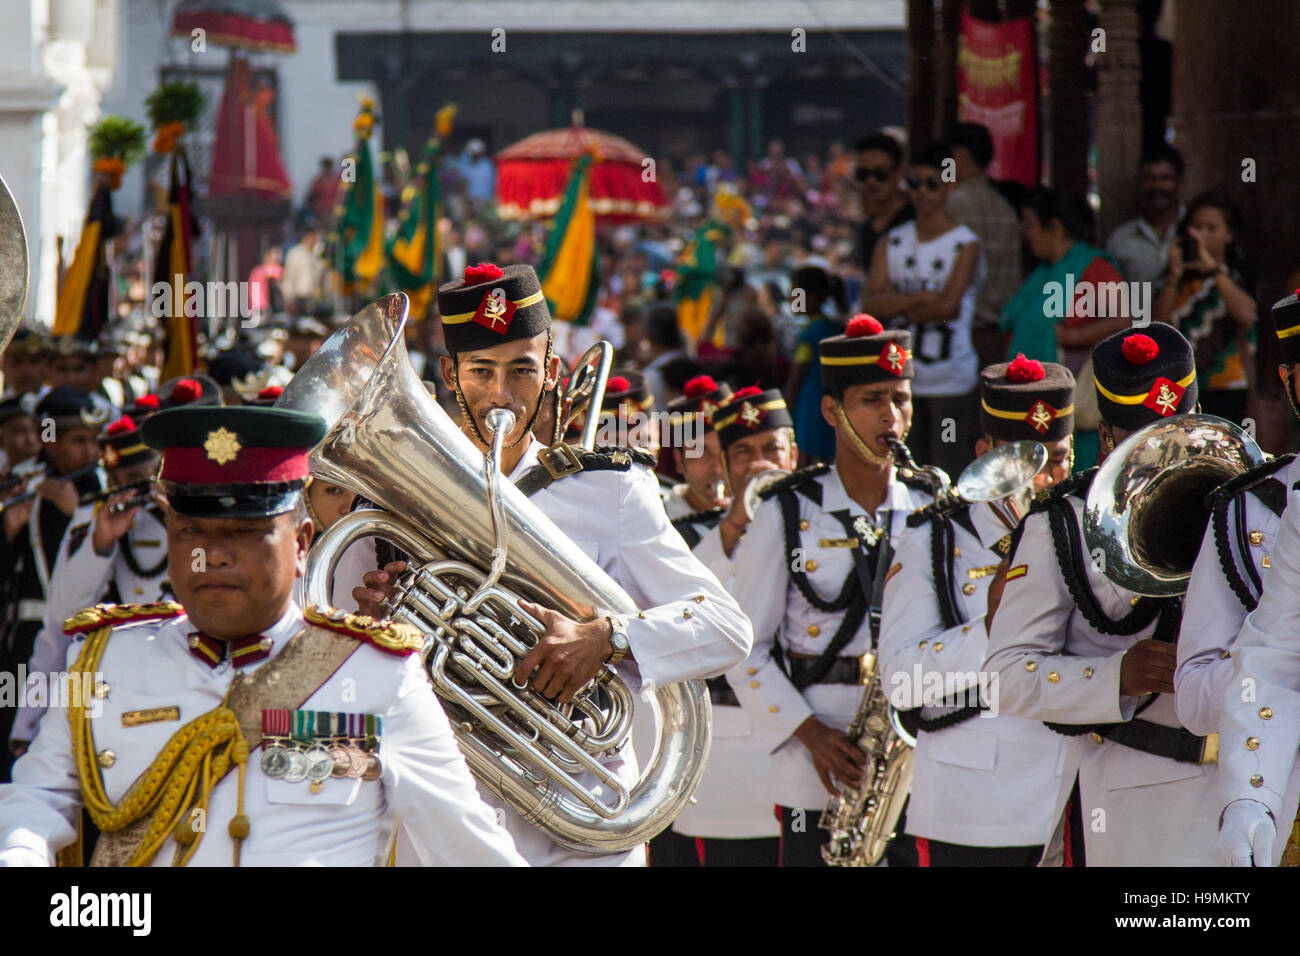 Ceremonial marching band in Durbar Square during Dashain festival in Kathmandu, Nepal Stock Photo